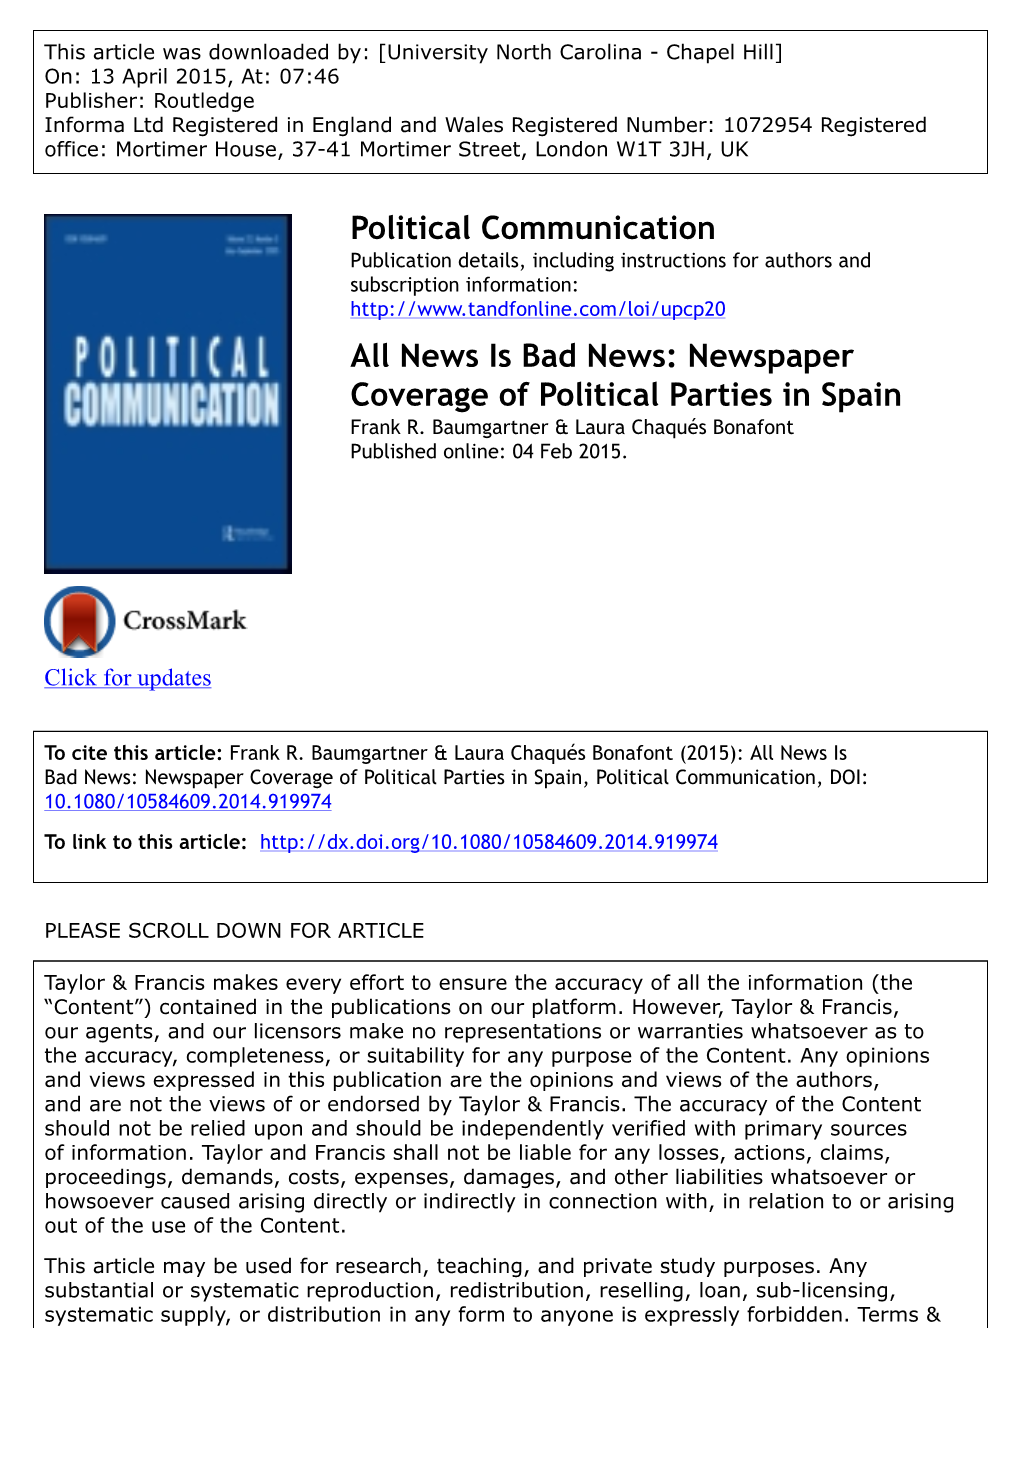 All News Is Bad News: Newspaper Coverage of Politics in Spain